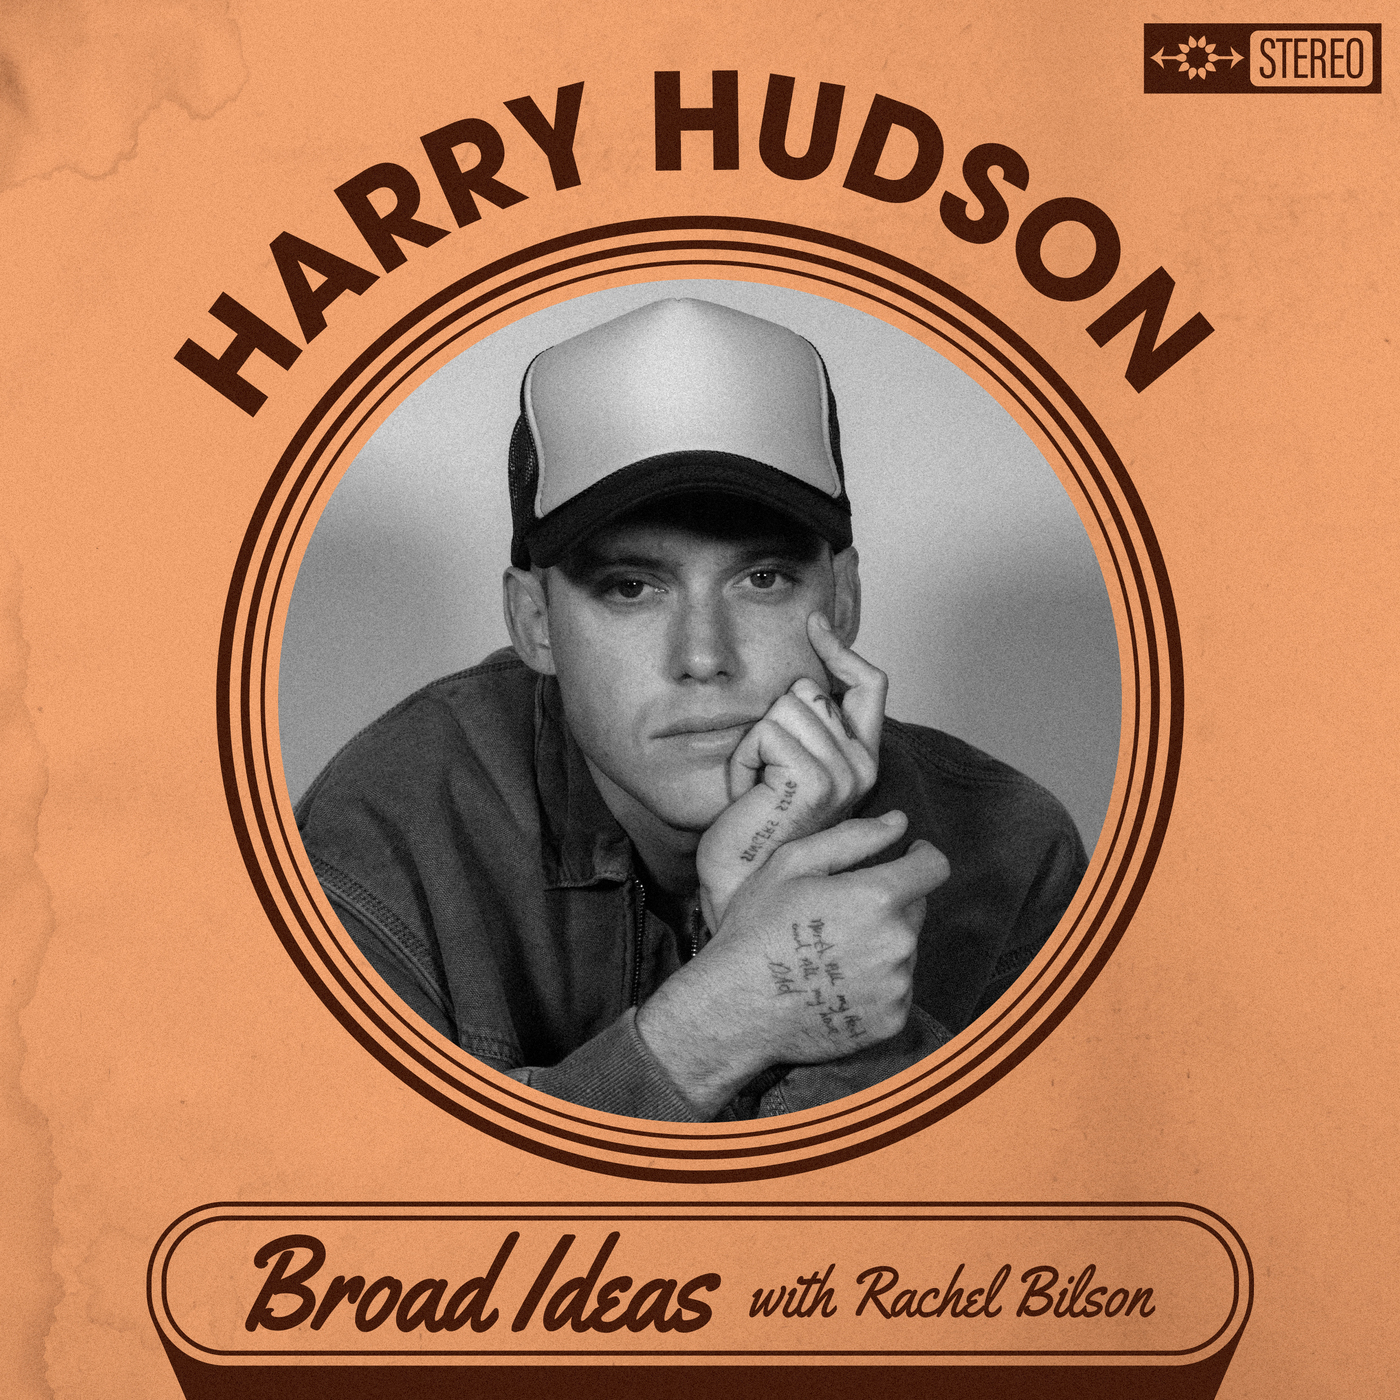 Harry Hudson on Rapping in The Valley, His Cancer Diagnosis, and Meeting Ghosts